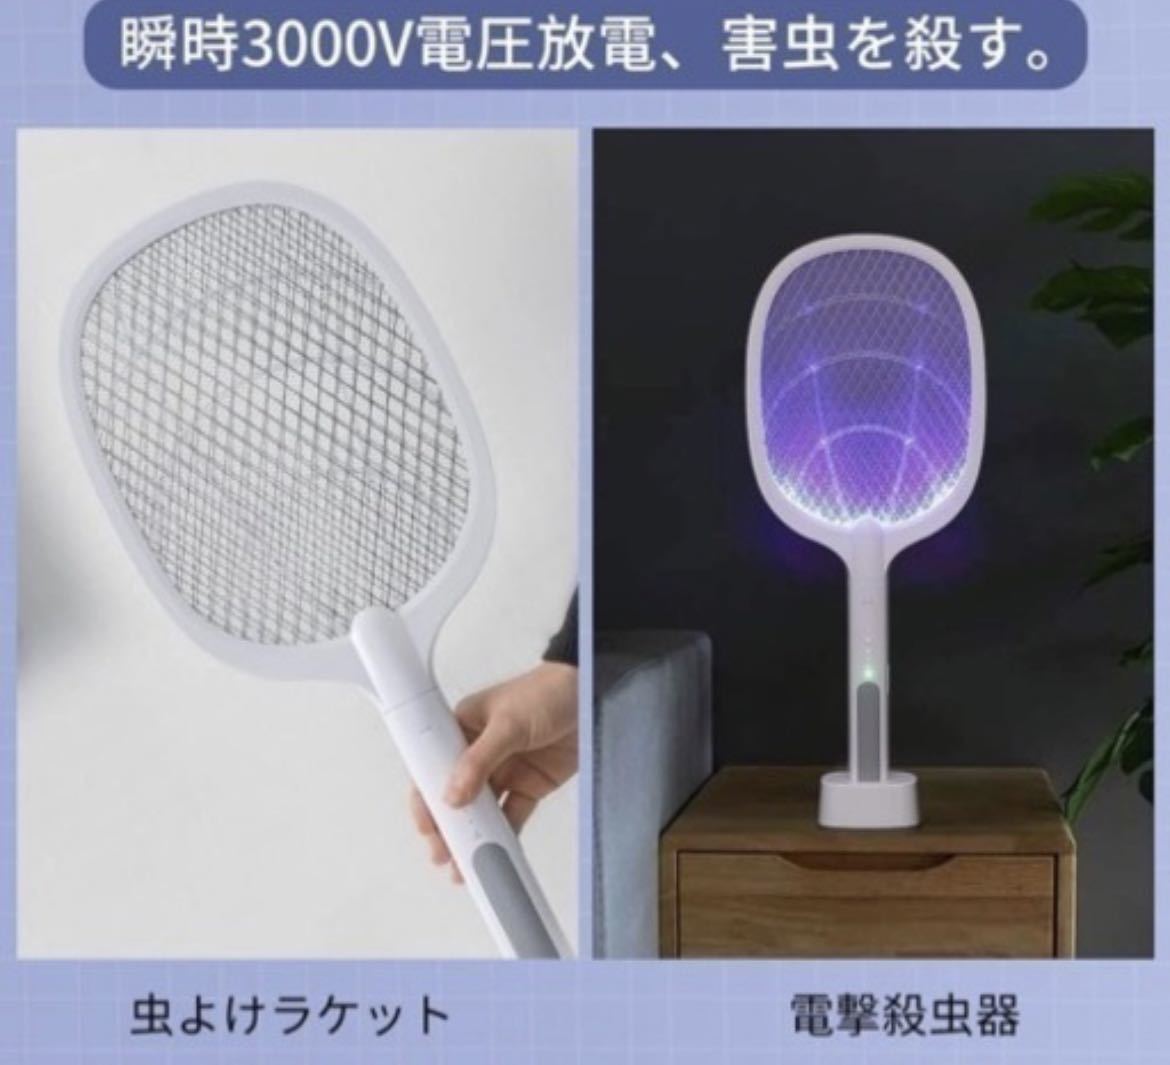  electric bug killer electric shock insecticide racket fly beater mosquito repellent vessel . insect vessel uv light three-ply protection 